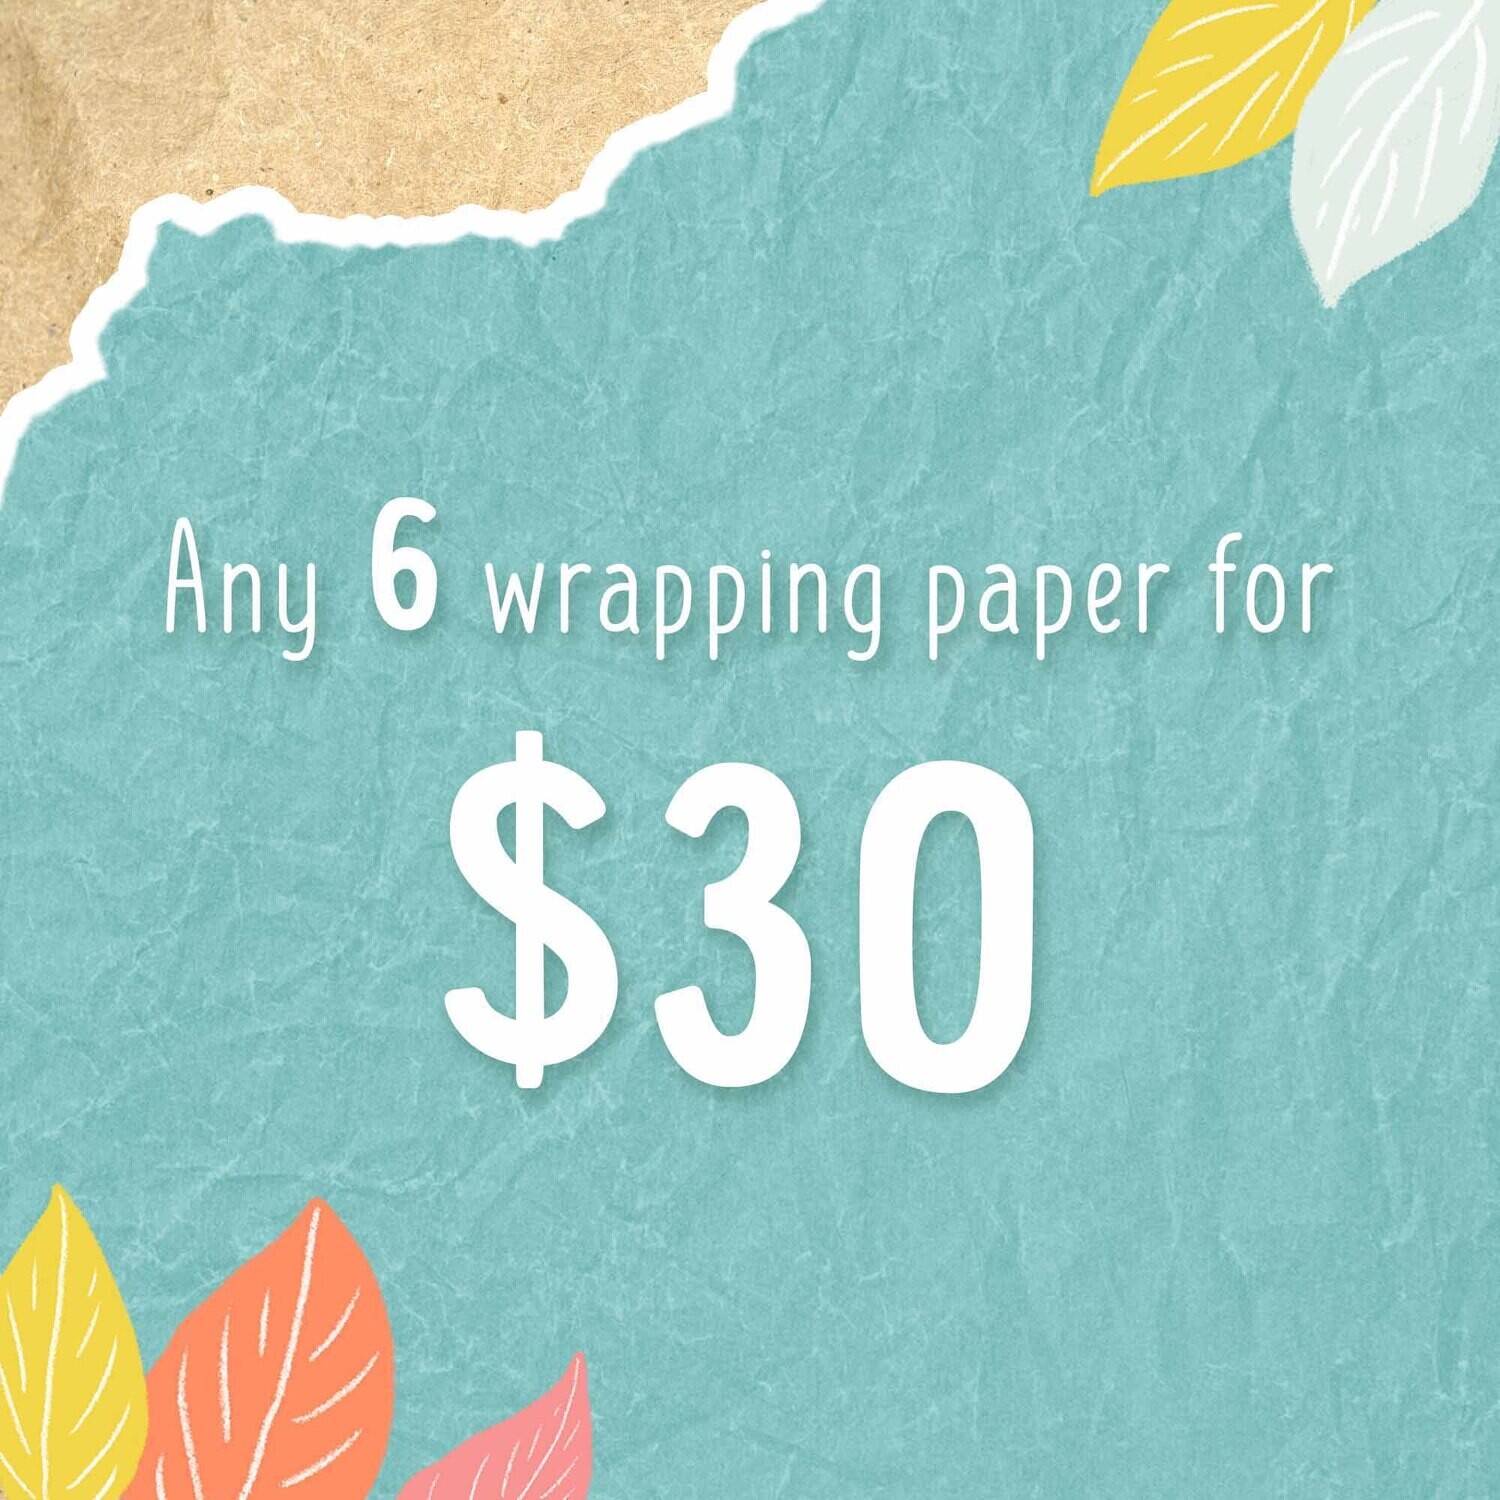 Wrapping paper deal! Any 6 wrapping papers for $30